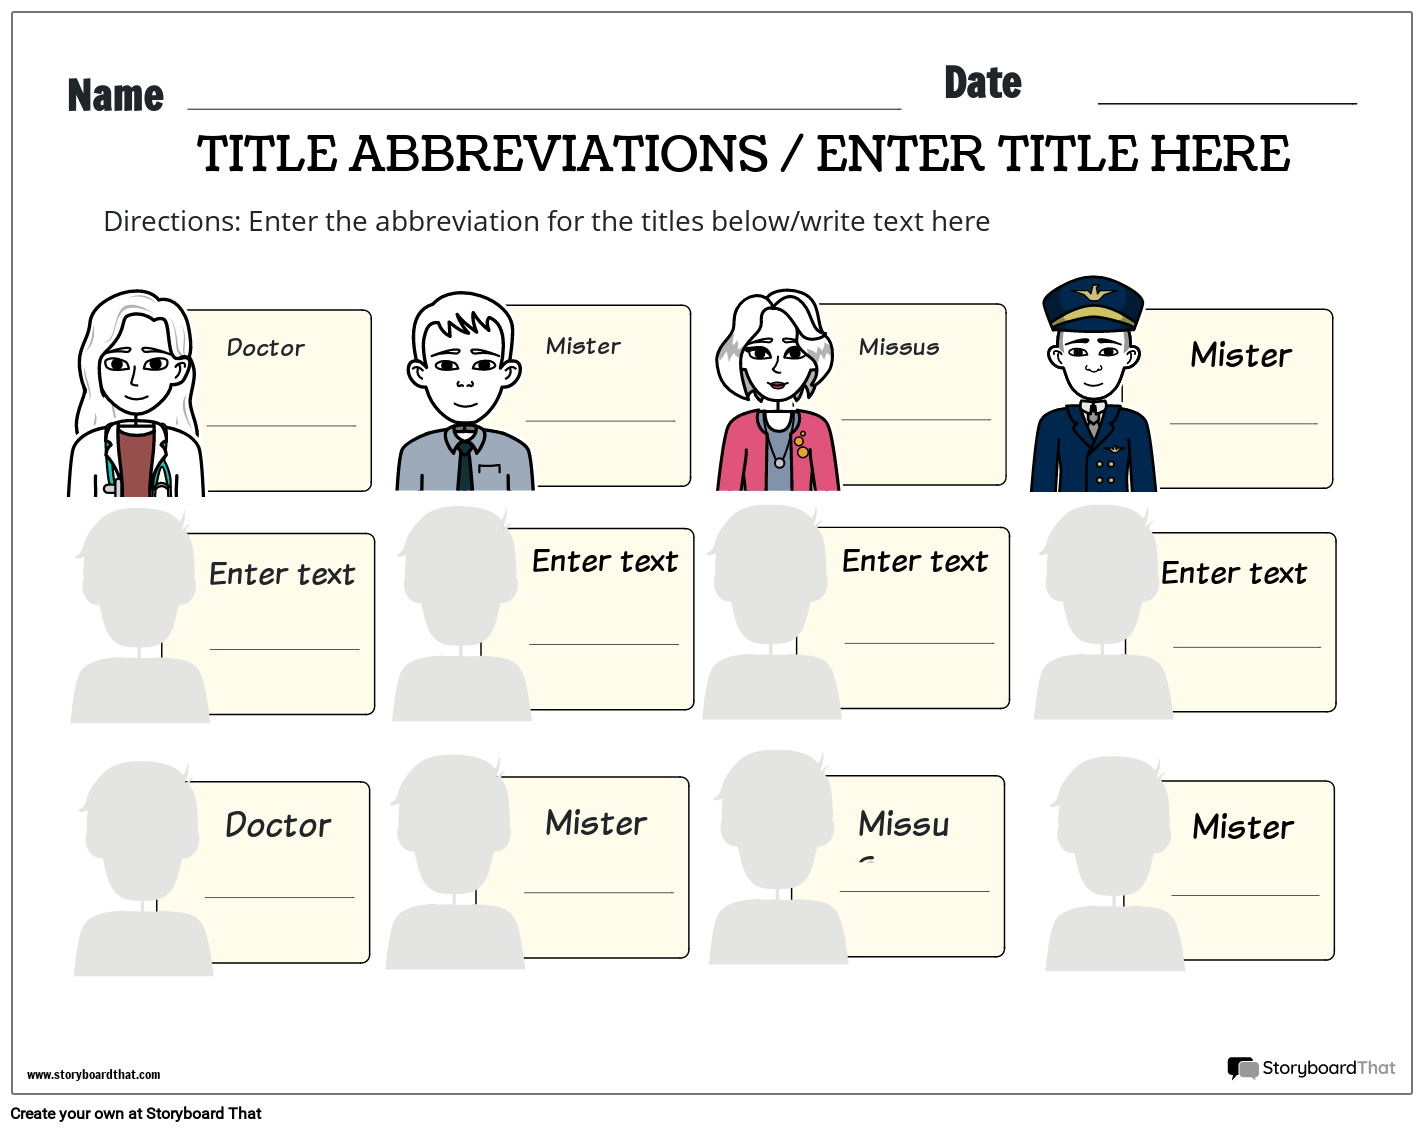 Who is Who? Abbreviations for People Titles